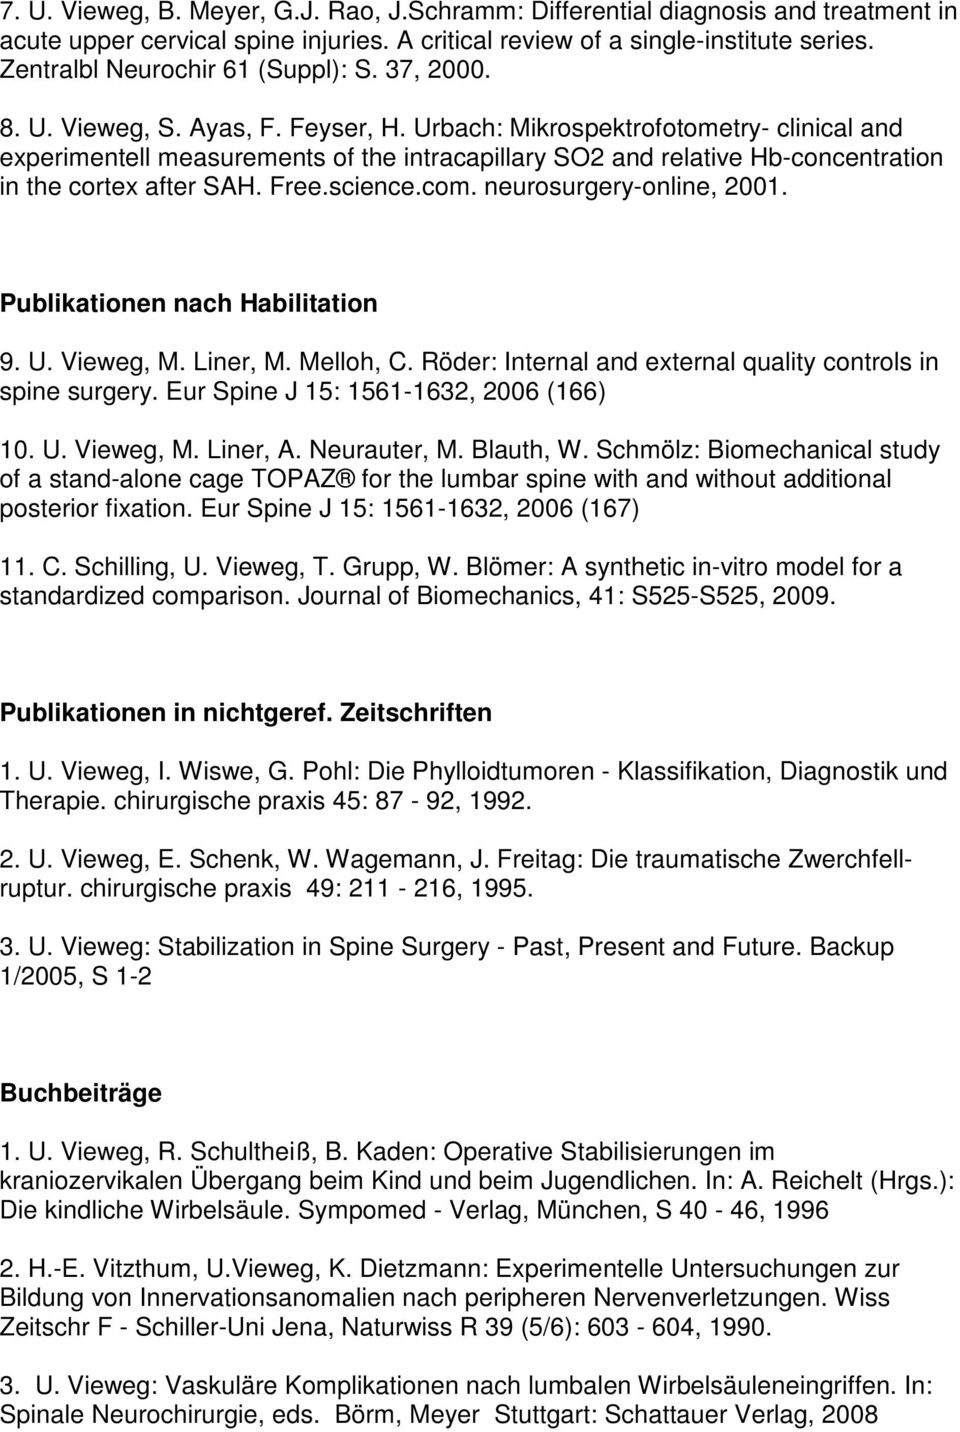 Urbach: Mikrospektrofotometry- clinical and experimentell measurements of the intracapillary SO2 and relative Hb-concentration in the cortex after SAH. Free.science.com. neurosurgery-online, 2001.